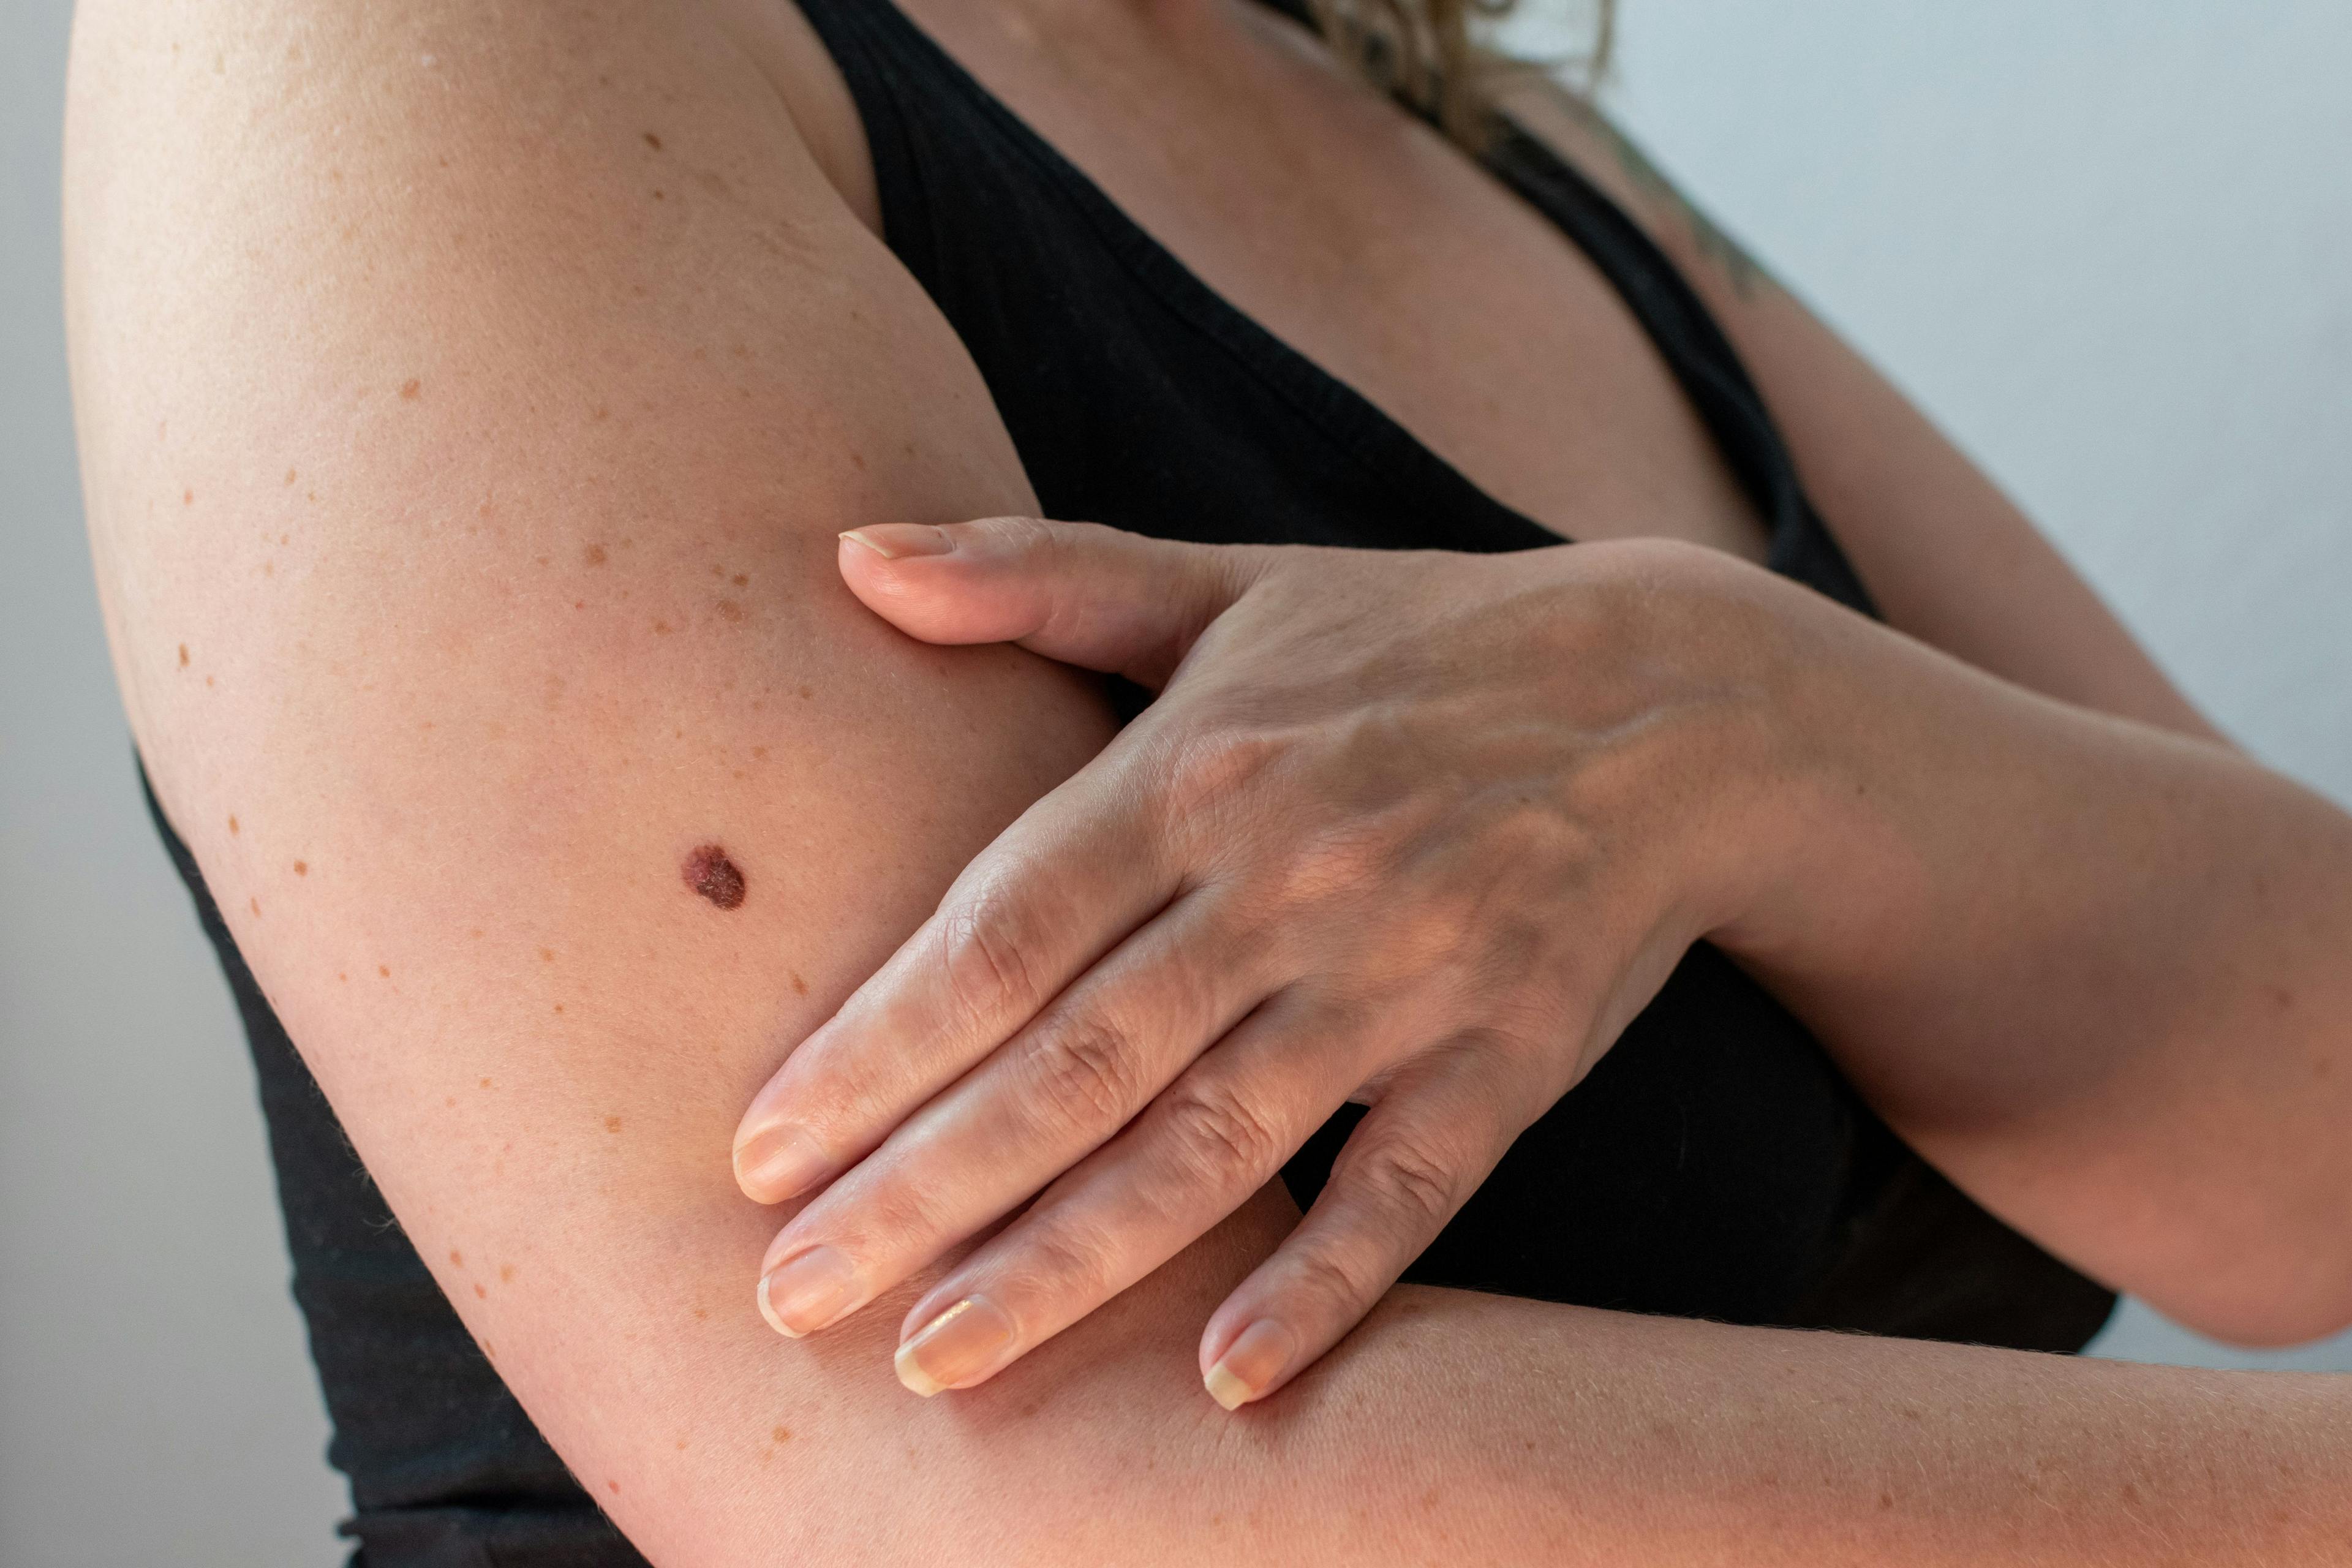 a womans arm with an abnormal mole that was diagnosed as being malignant melanoma skin cancer | Image Credit:  MW Photography - stock.adobe.com